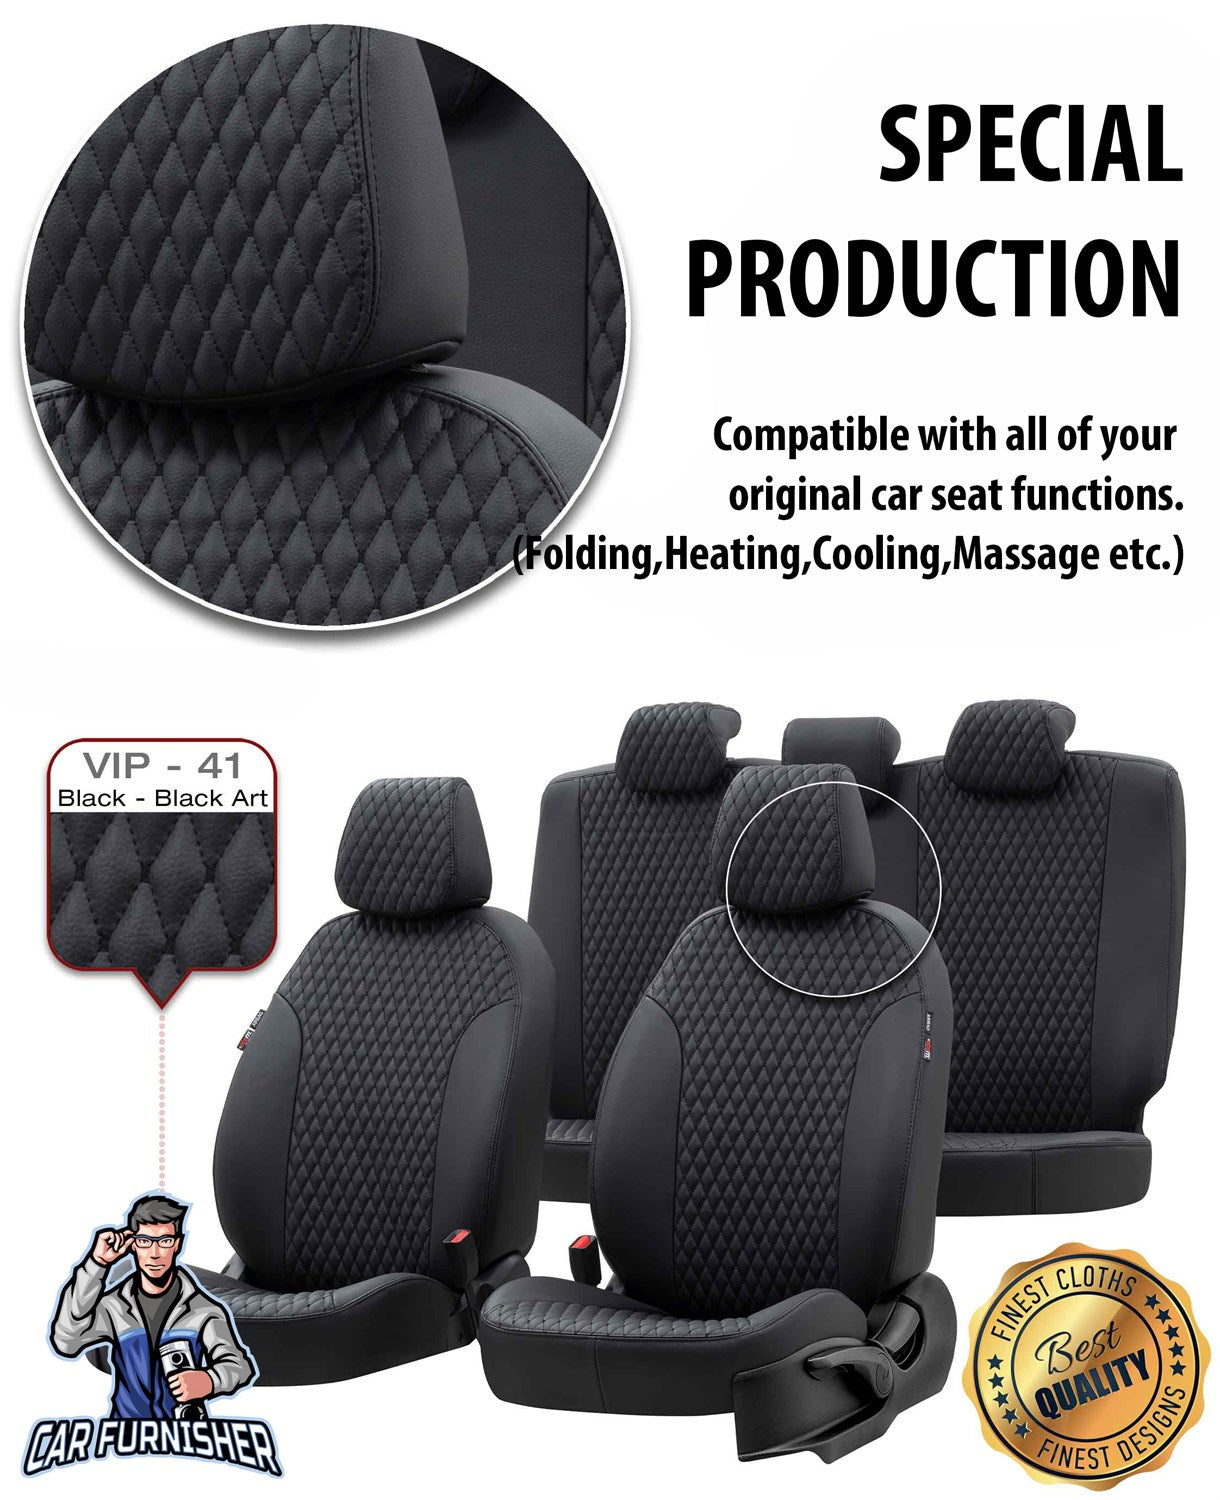 Seat Ateca Seat Covers Amsterdam Leather Design Smoked Black Leather